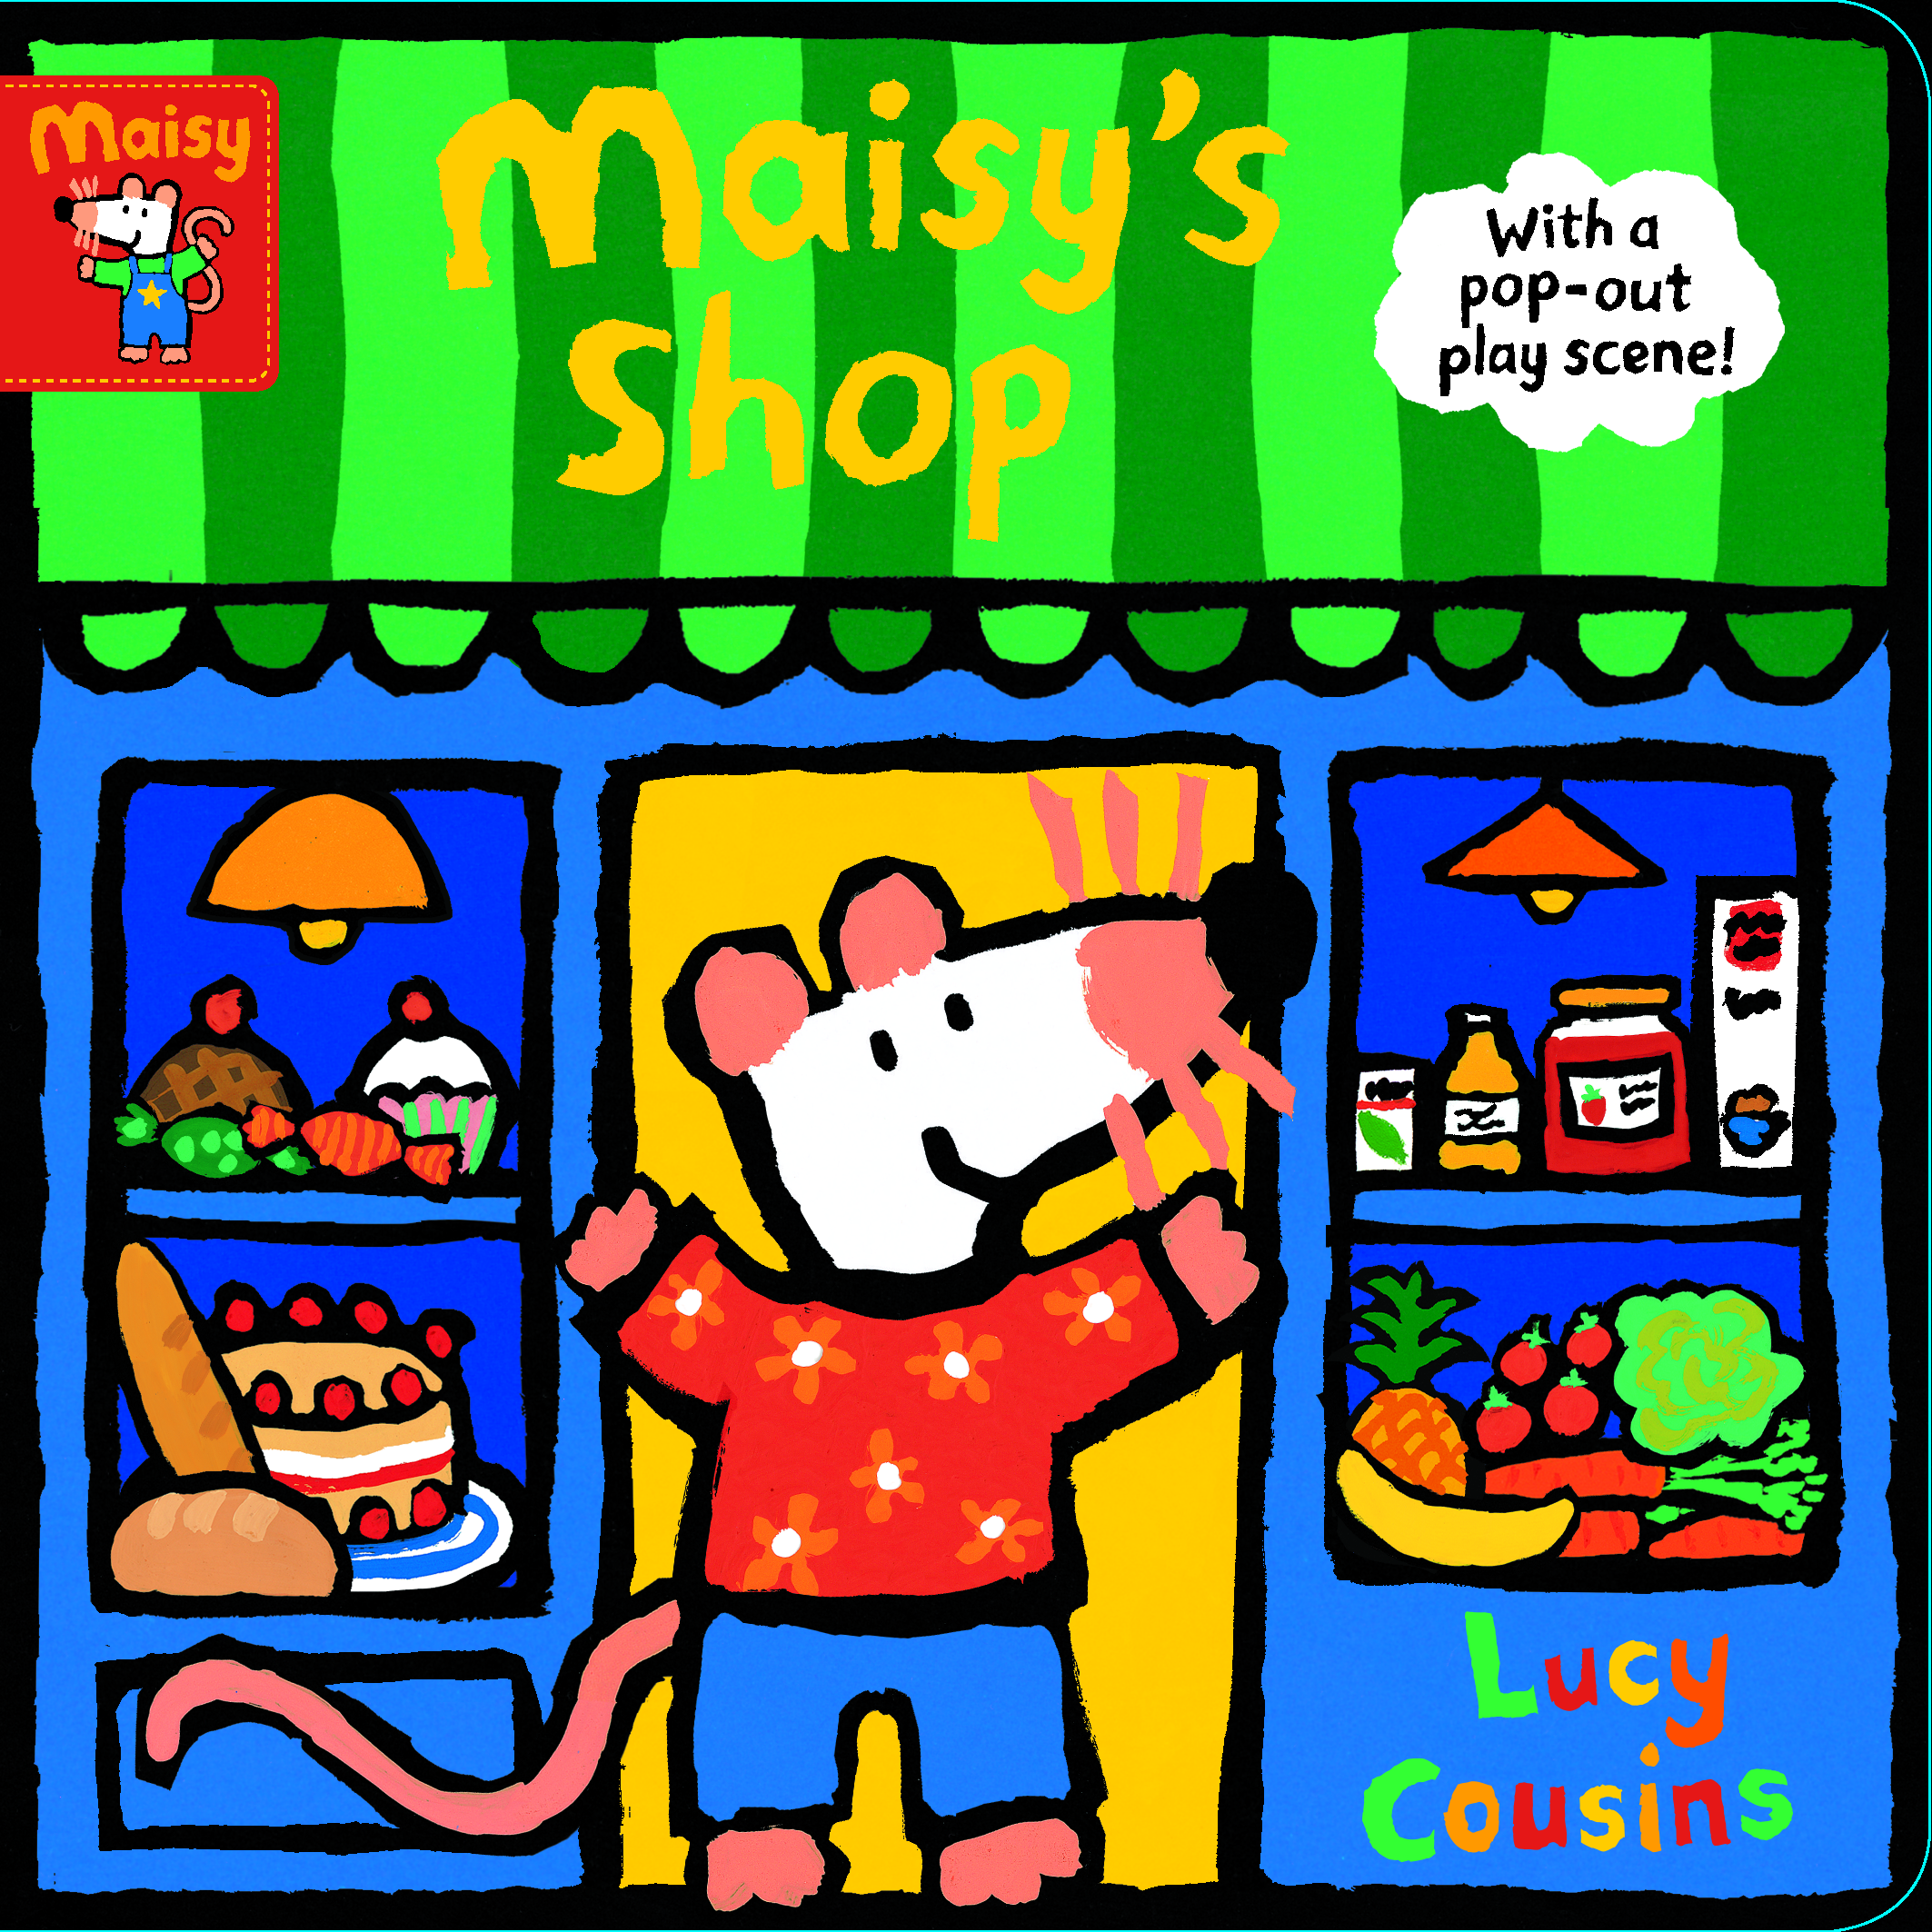 Maisy-s-Shop-With-a-pop-out-play-scene